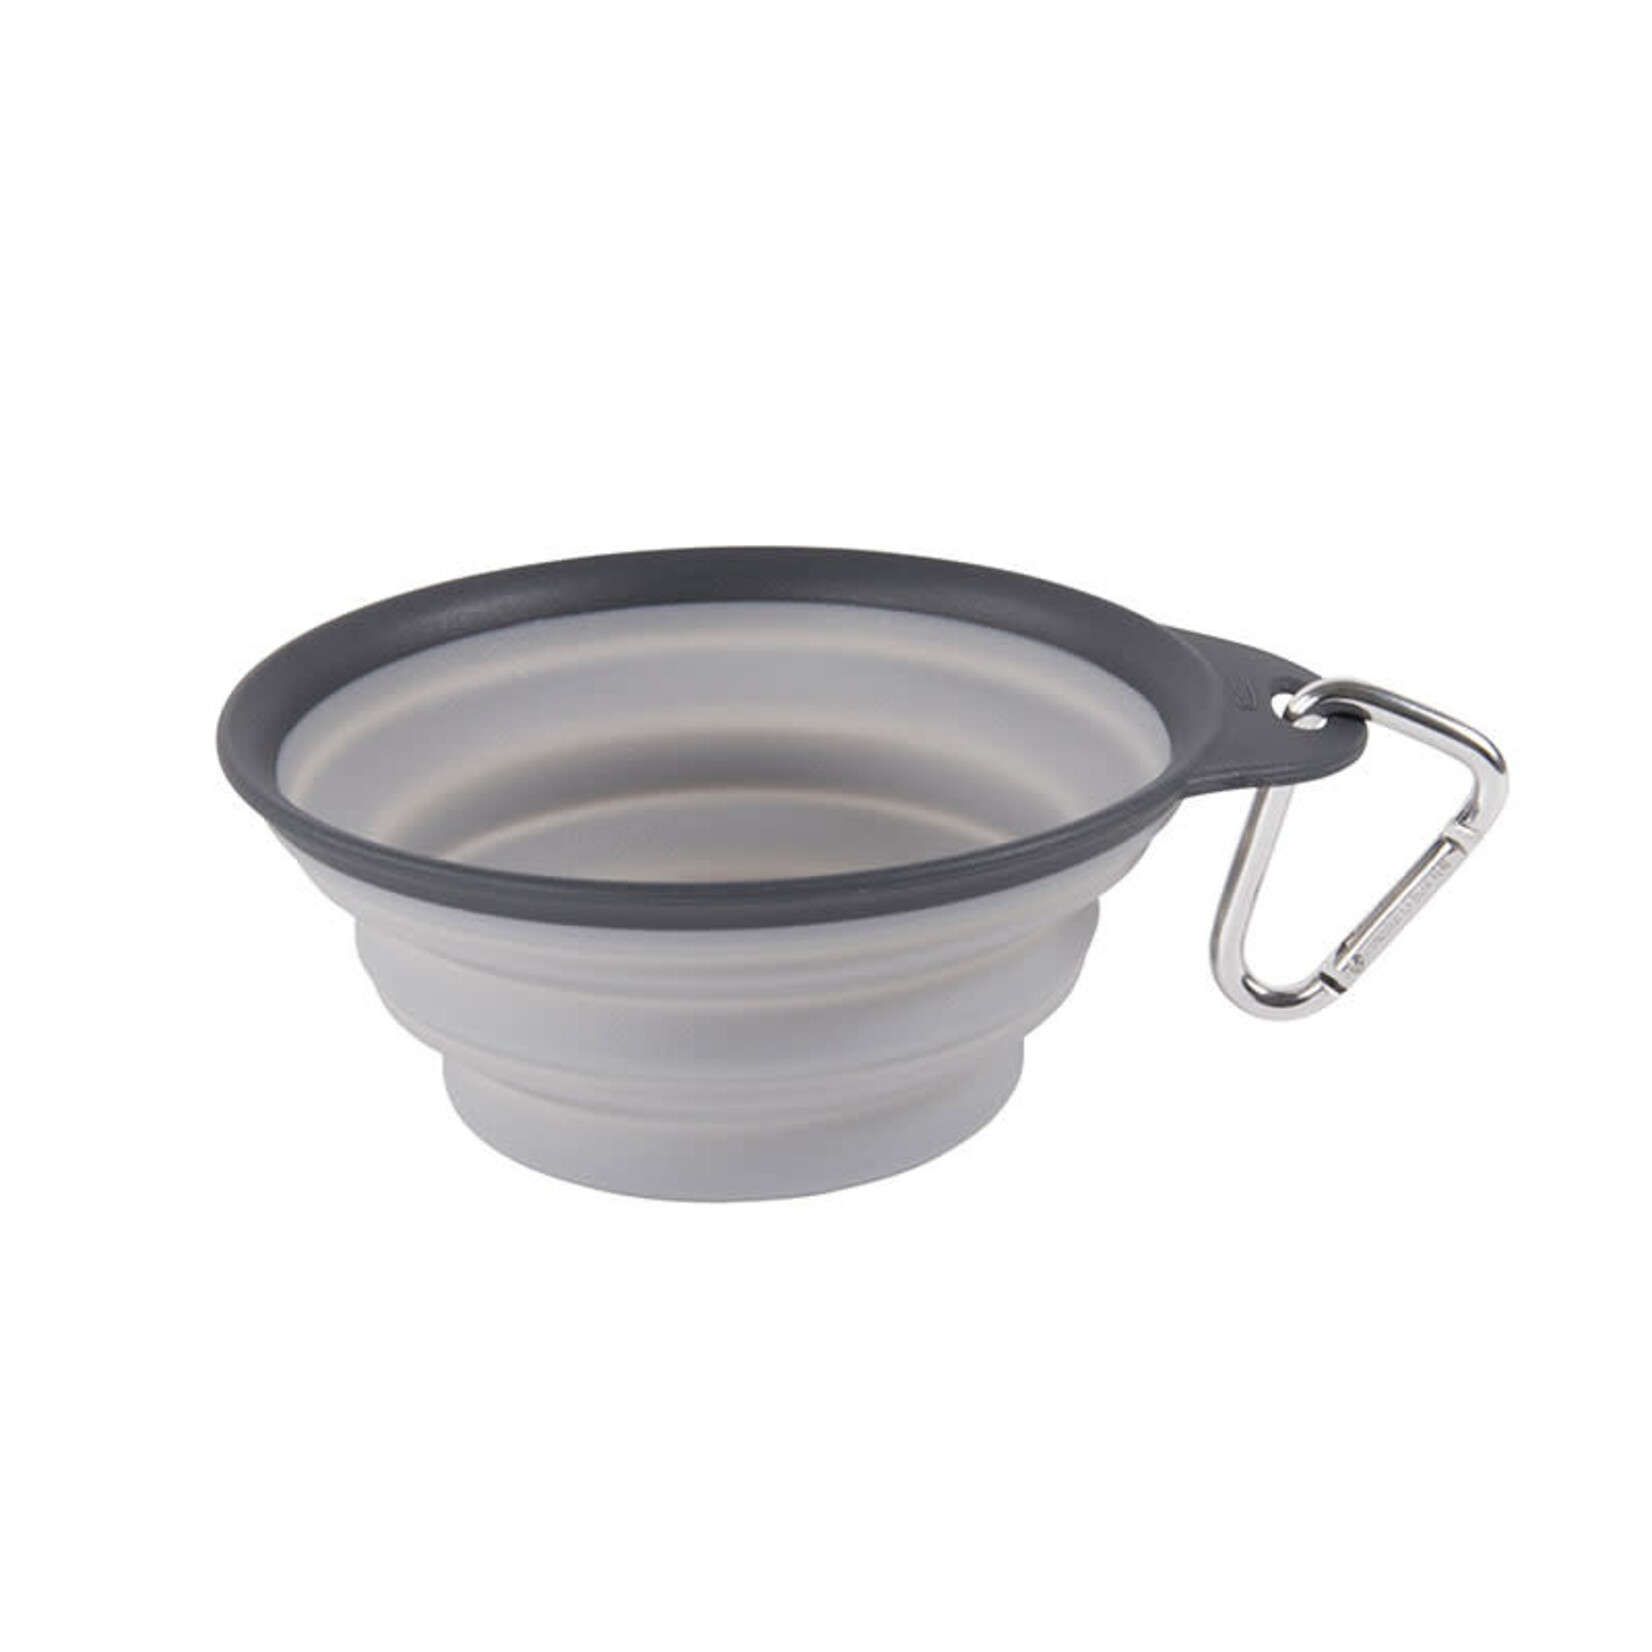 Popware - Collapsible Travel Bowl